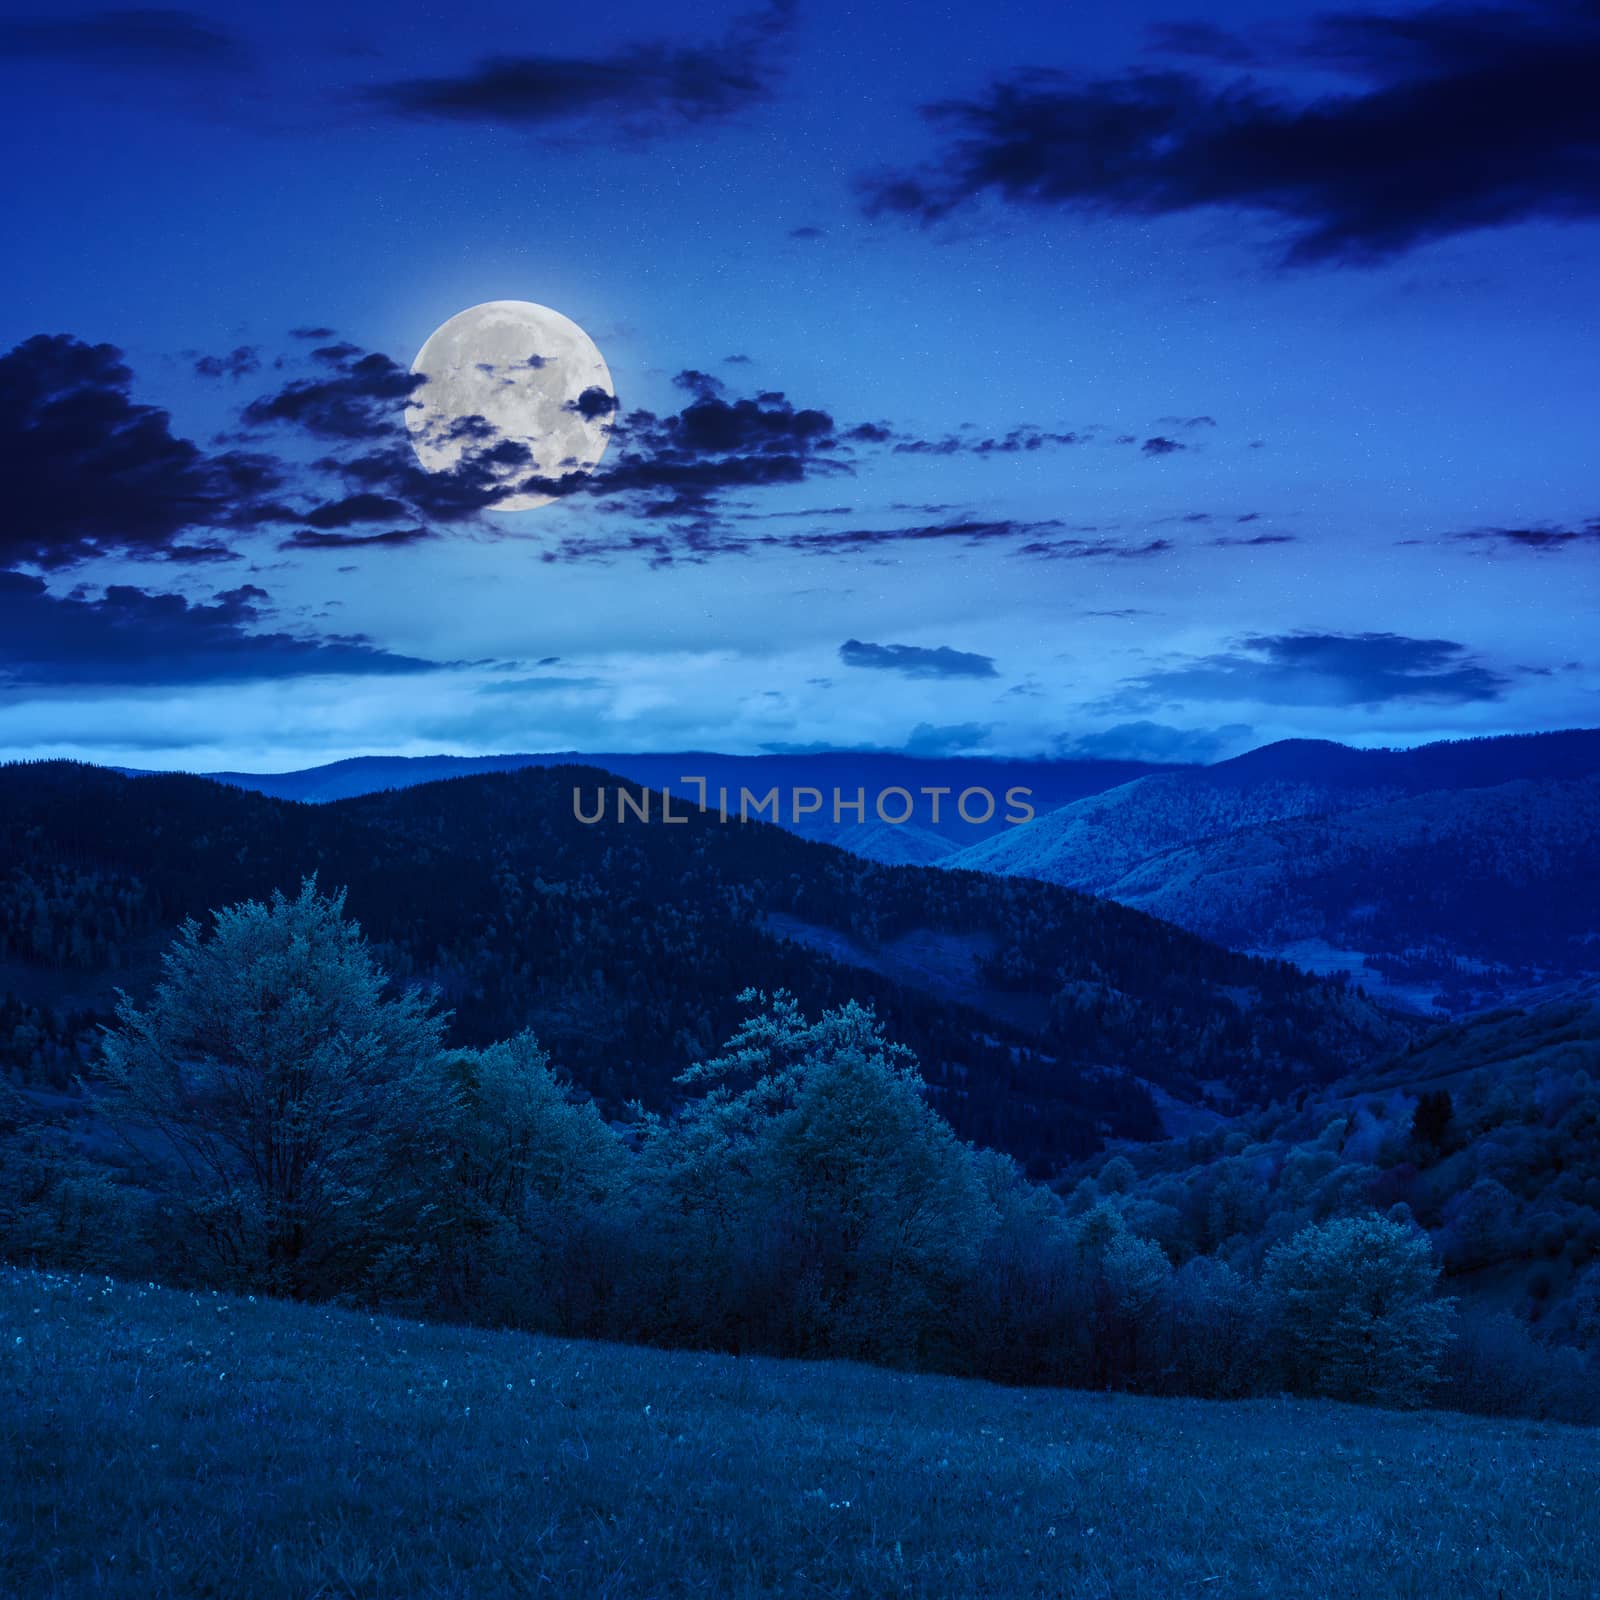 trees near valley in mountains  on hillside at night by Pellinni